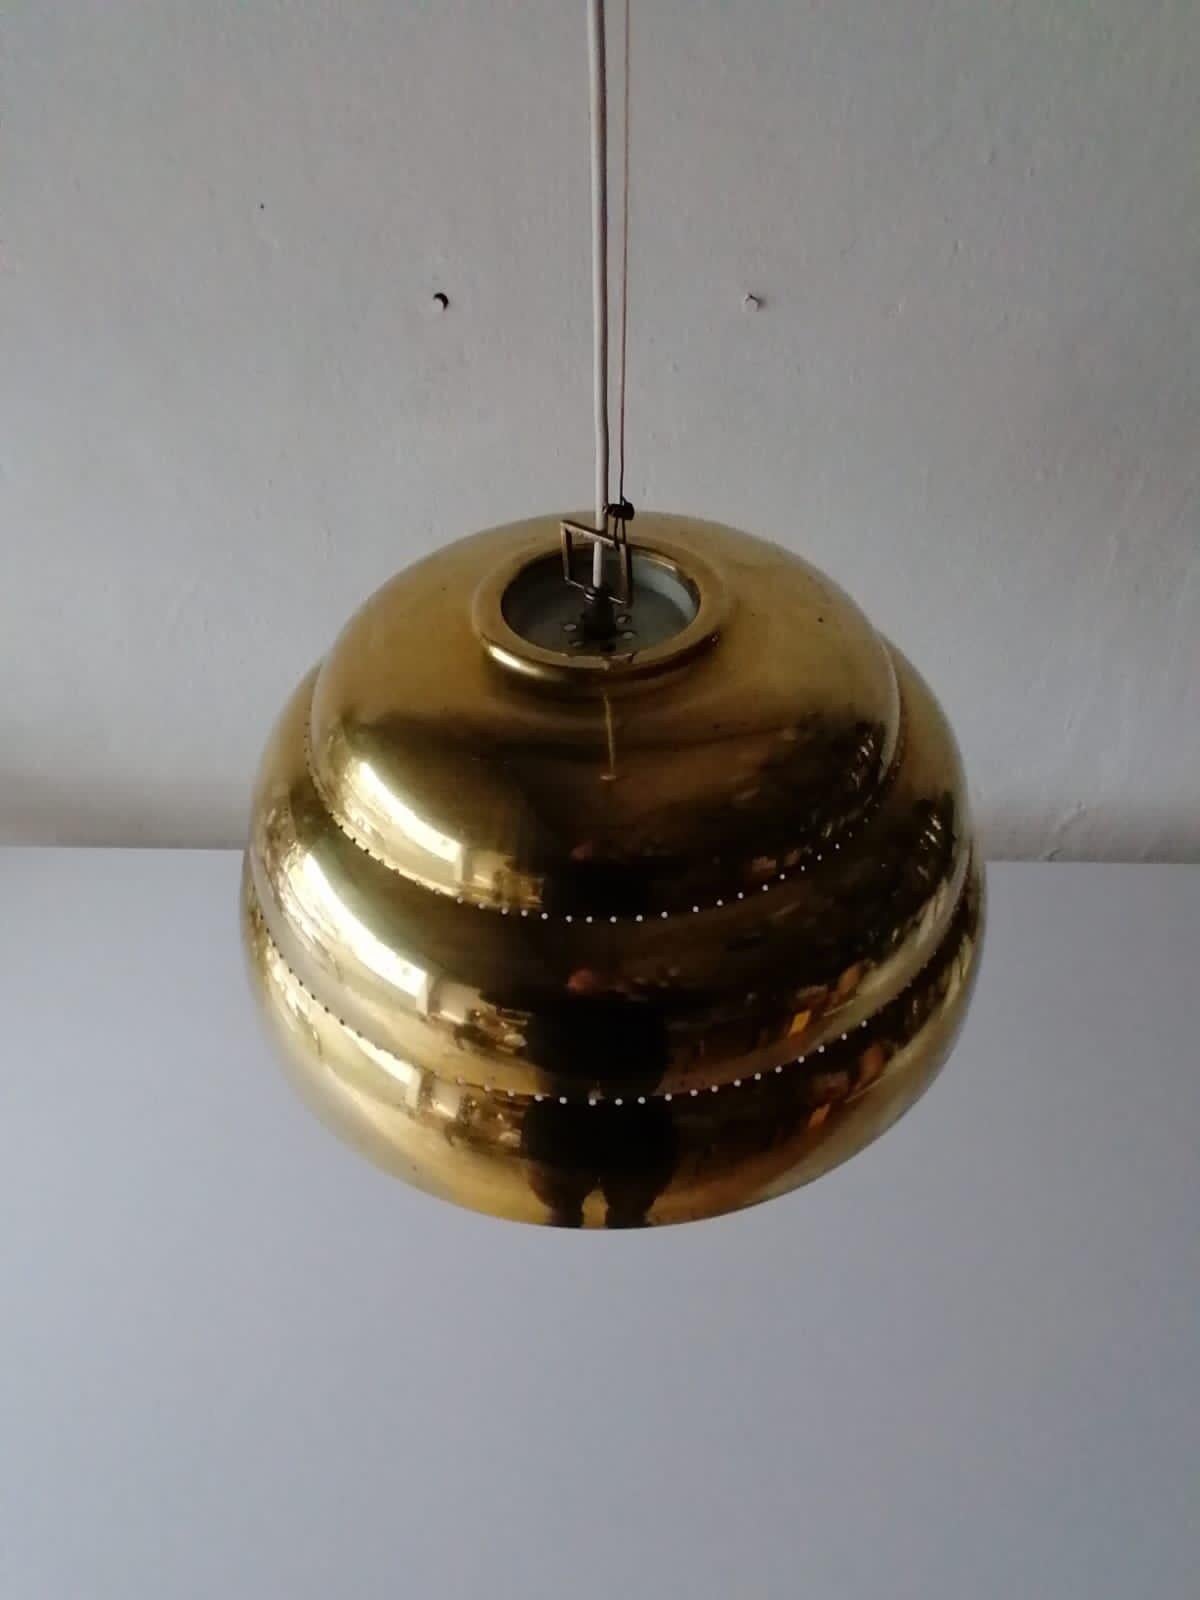 Gorgeous brass & glass suspension pendant lamp style of Paavo Tynell 1960s Finland

Unusual and rare design. 

Lampshade is in good condition and very clean.

This lamp works with E27 light bulb. Max 100W
Wired and suitable to use with 220V